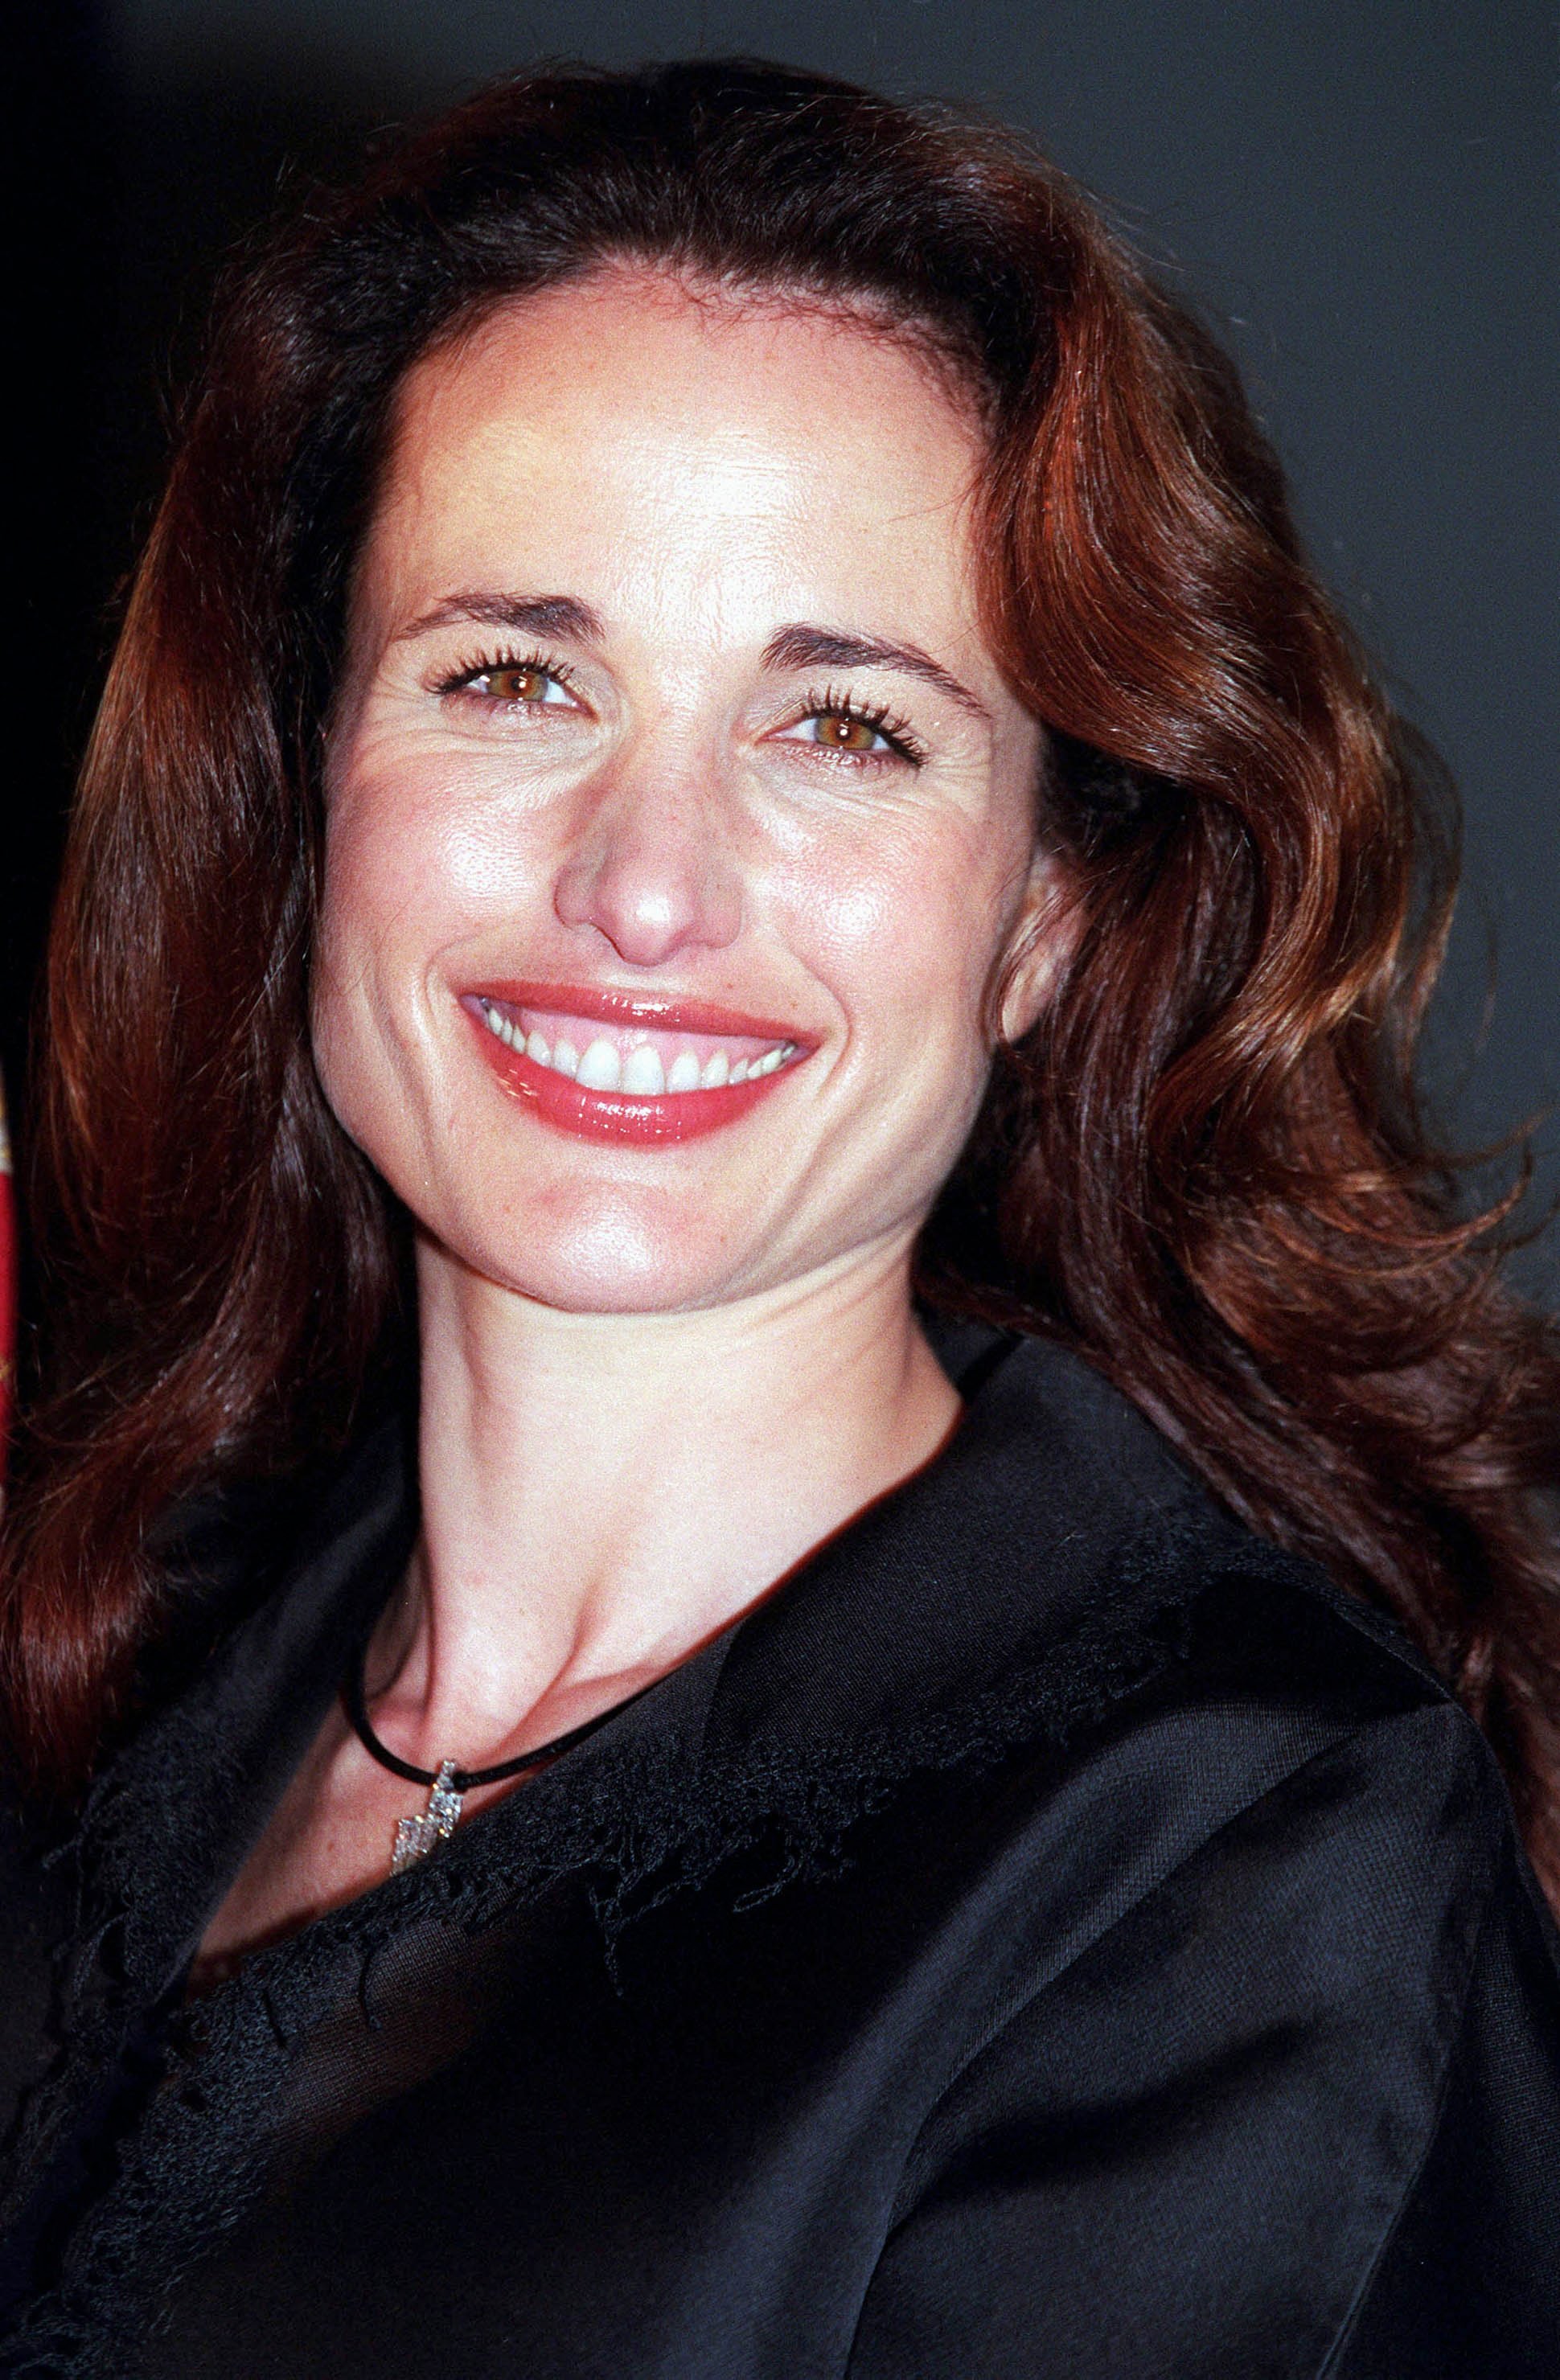 Andie MacDowell in Cannes, Frankreich am 12. Mai 2000 | Quelle: Getty Images